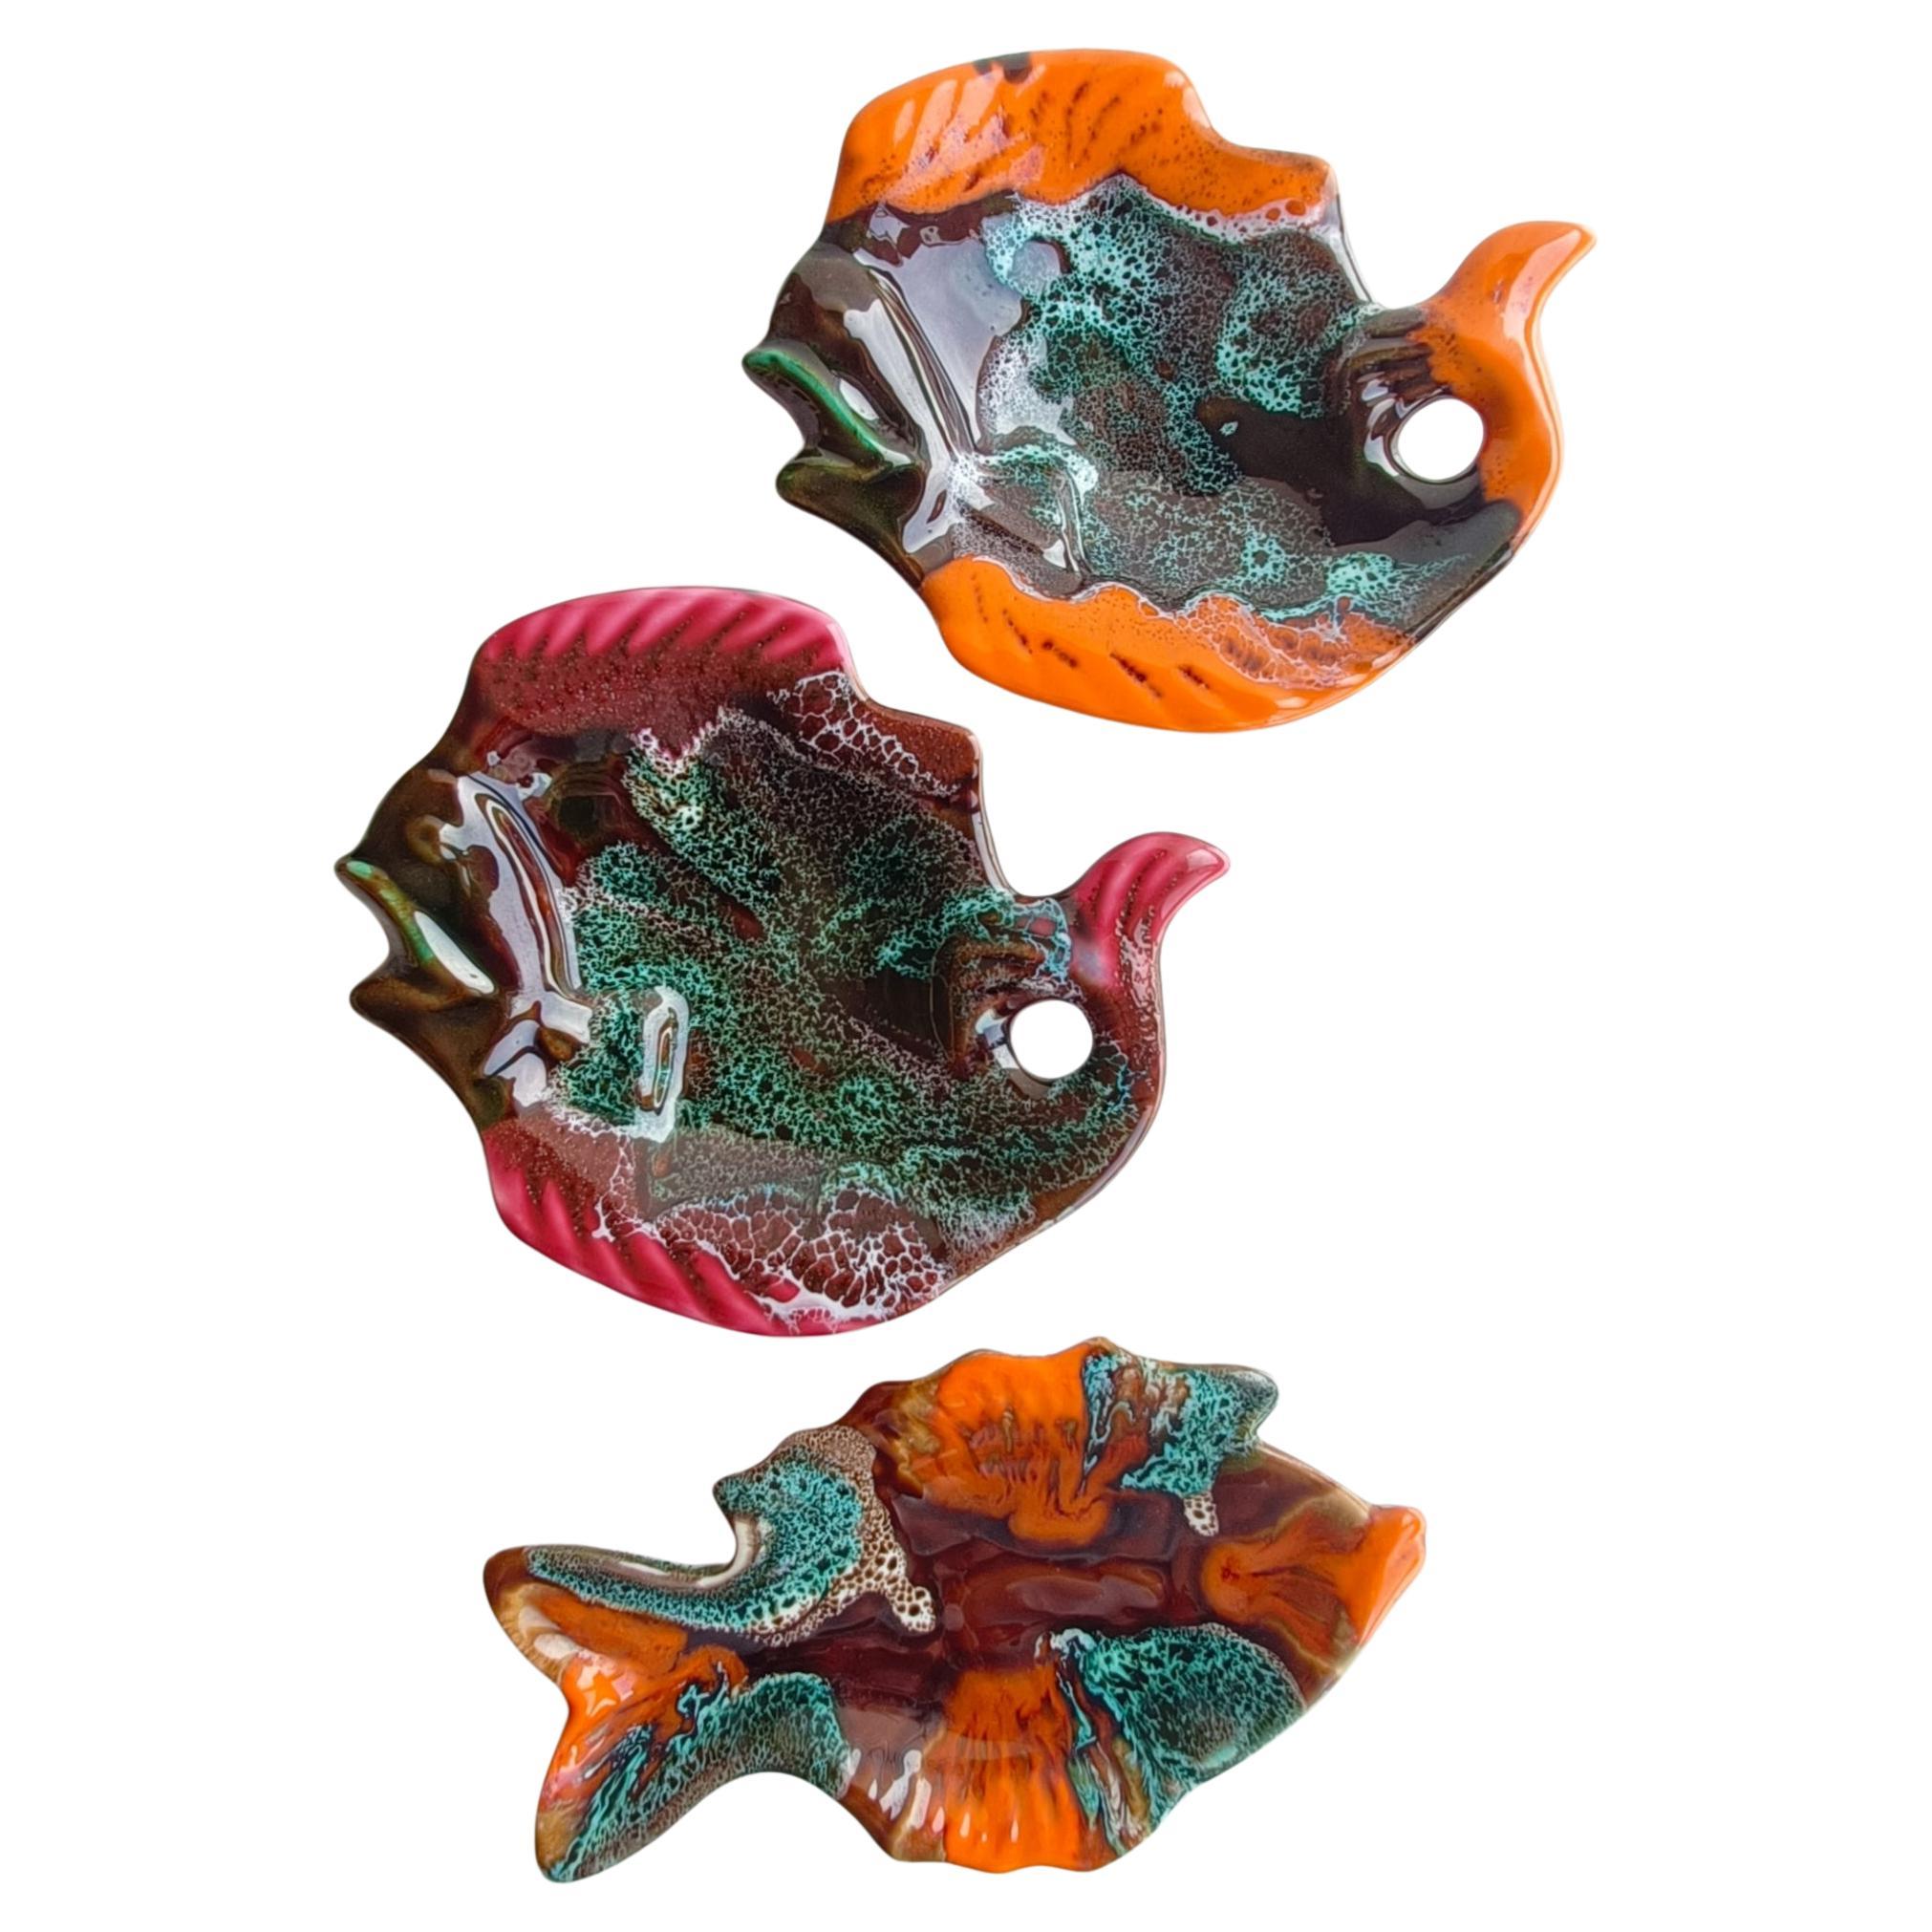 Mid-Century Modern Vintage French Vallauris Signed Fat Lava Ceramic Fish Sculpture-Trays, 1950s For Sale